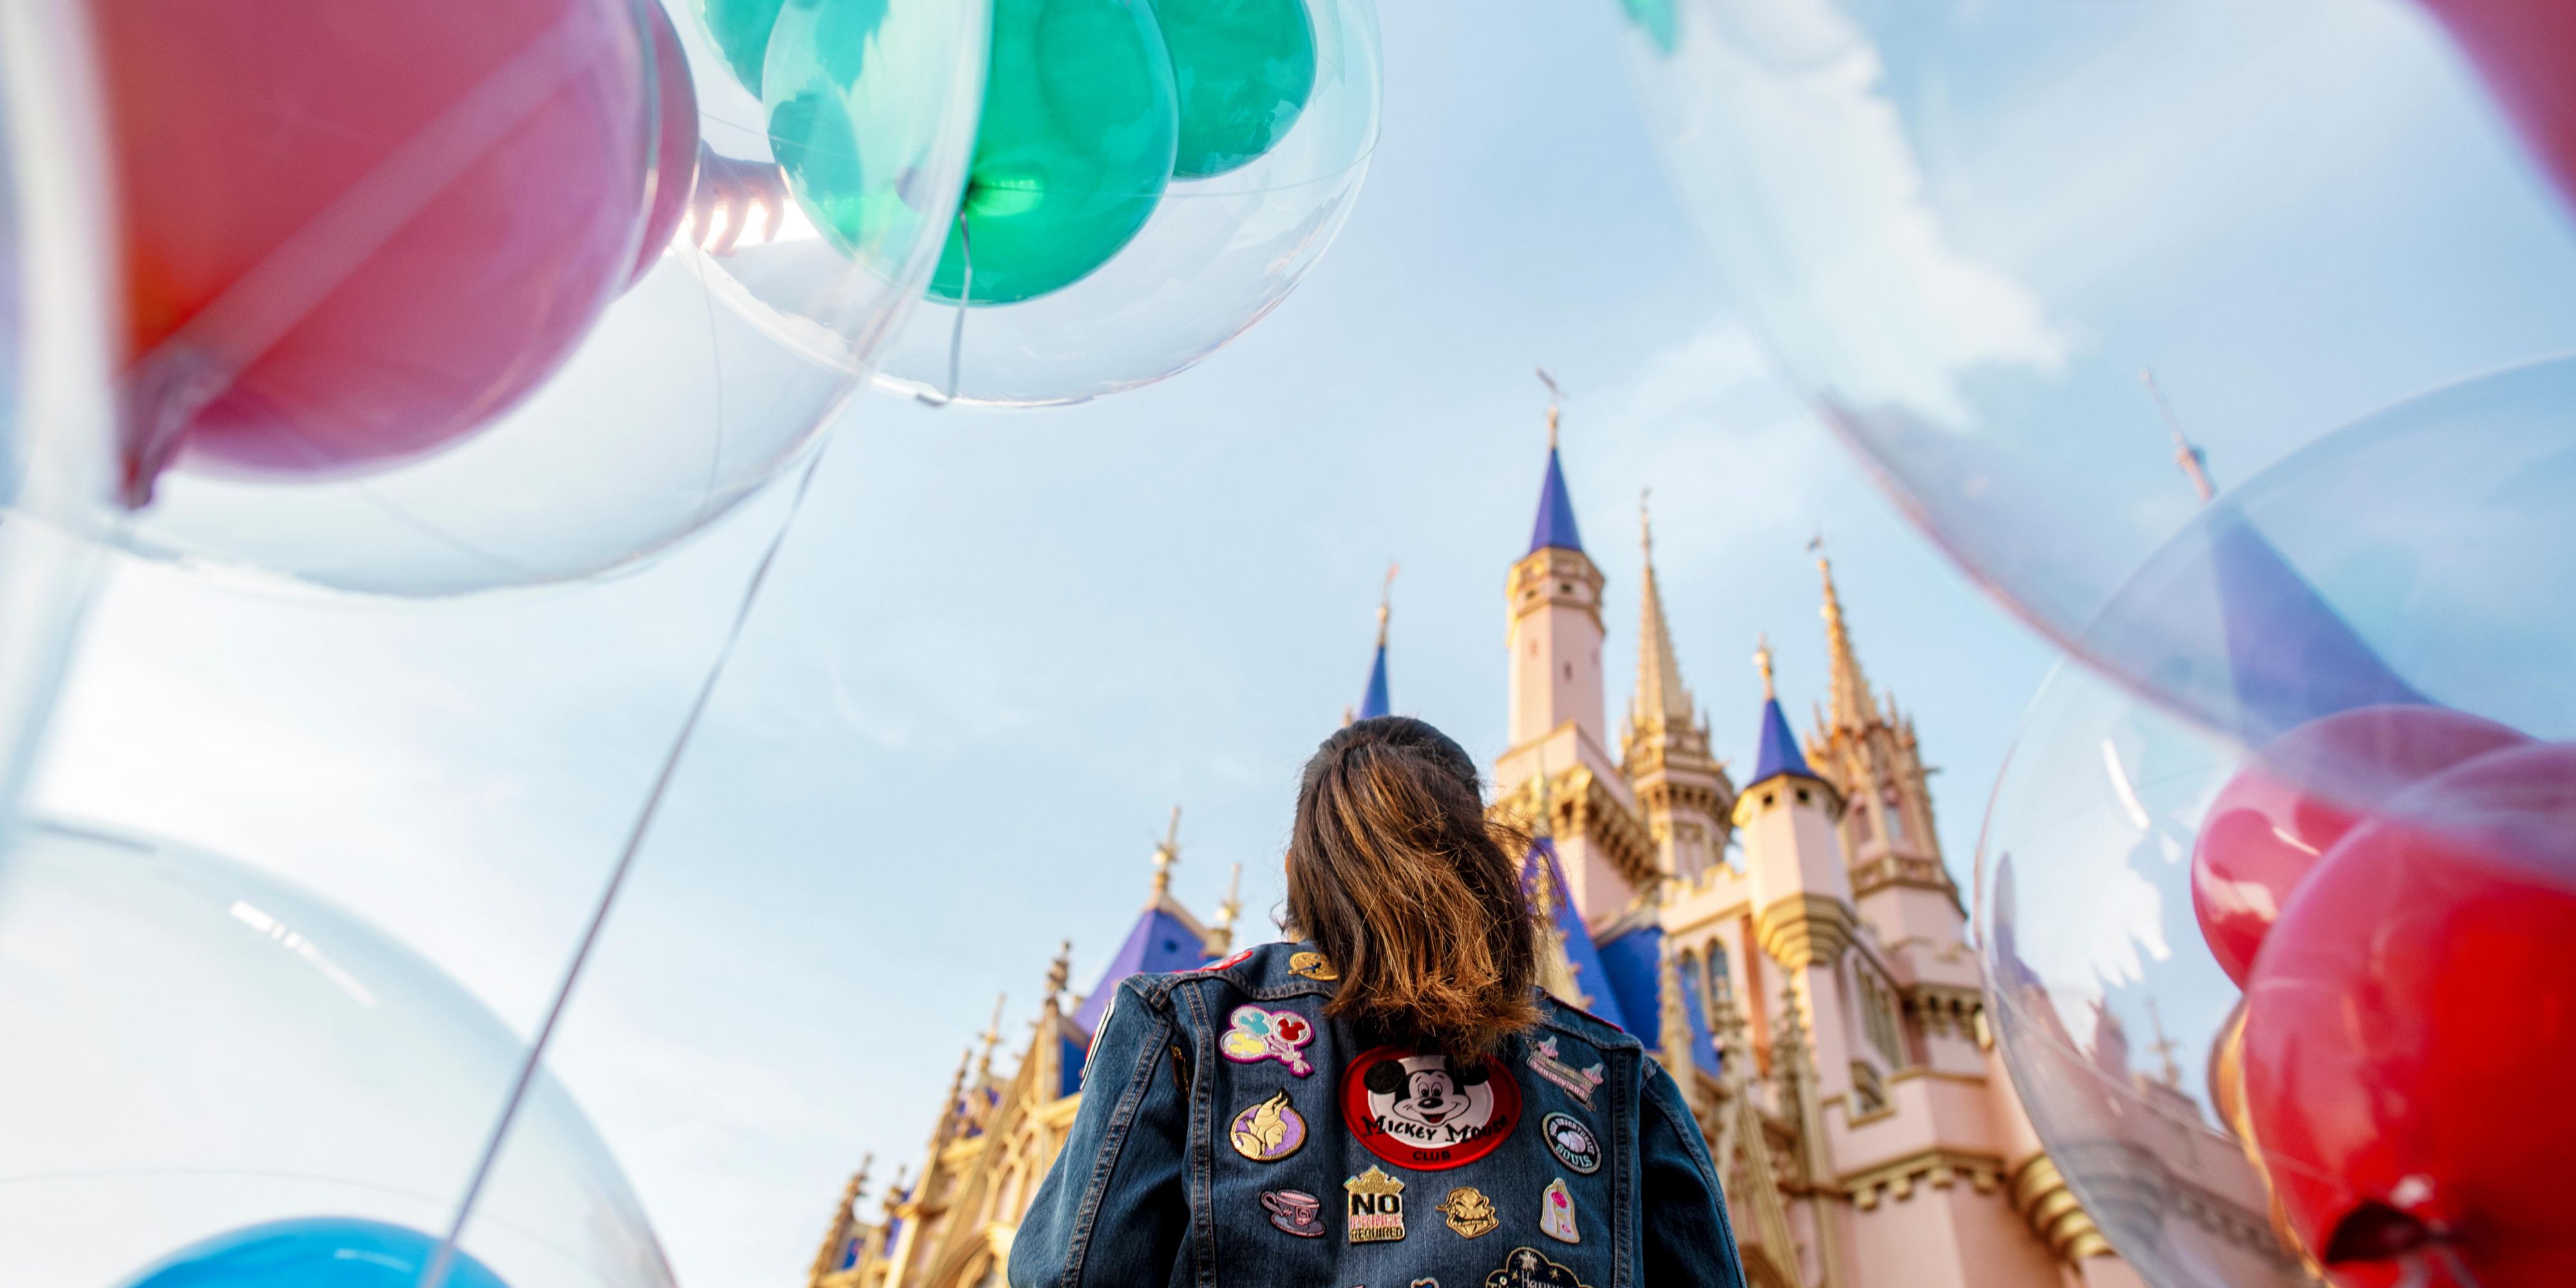 Buy park tickets online or stop by our Information Desk to purchase park tickets and schedule your complimentary Walt Disney World and Universal Orlando shuttle service.